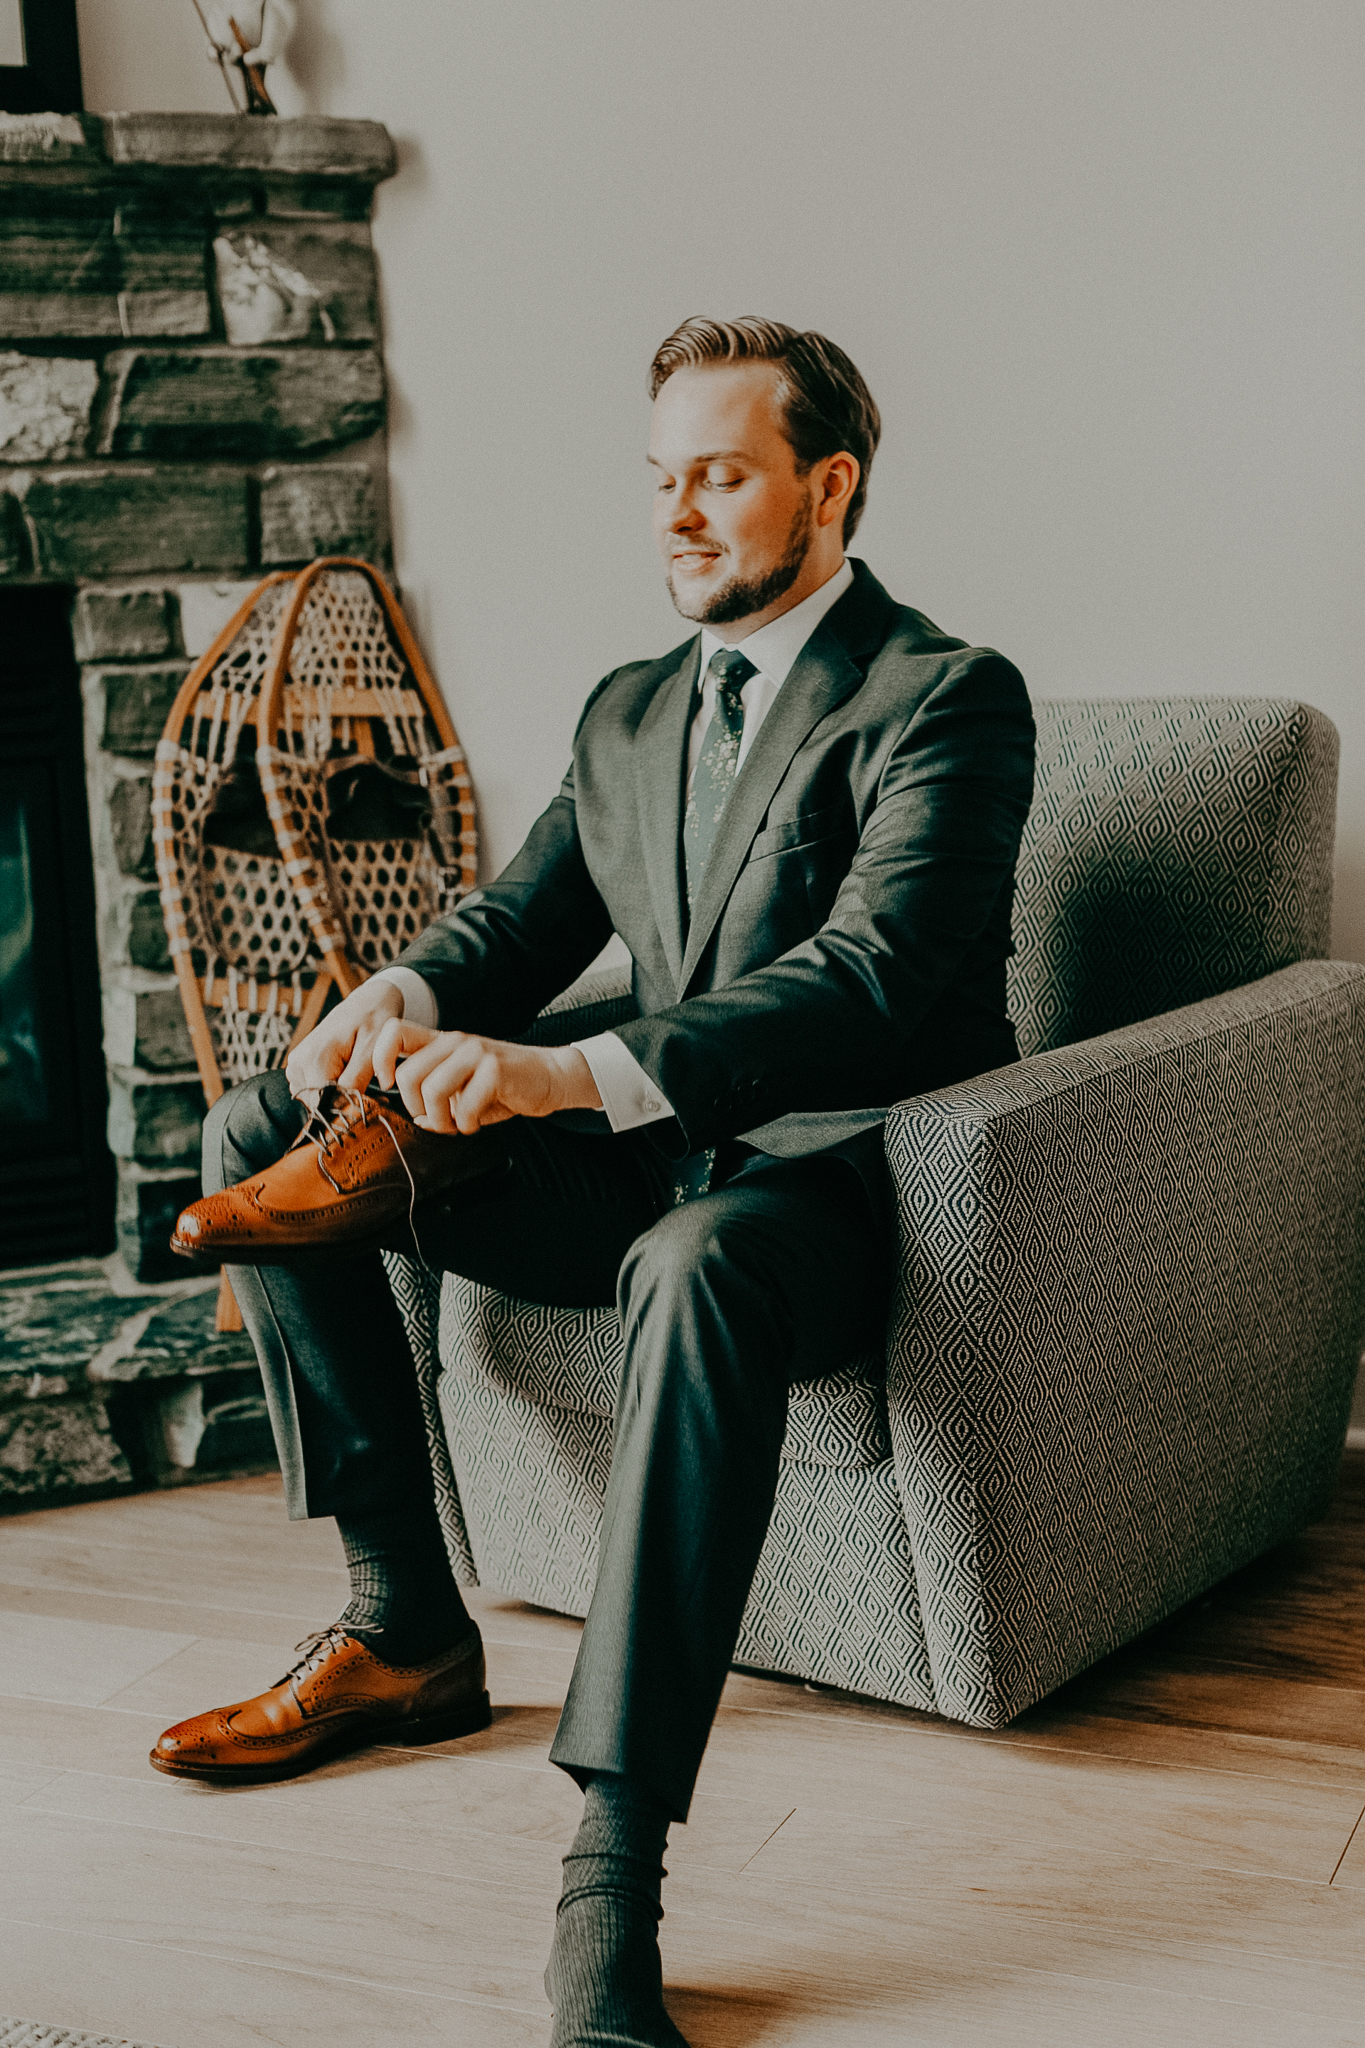 Groom sits on grey chair in grey suit and puts on brown dress shoes